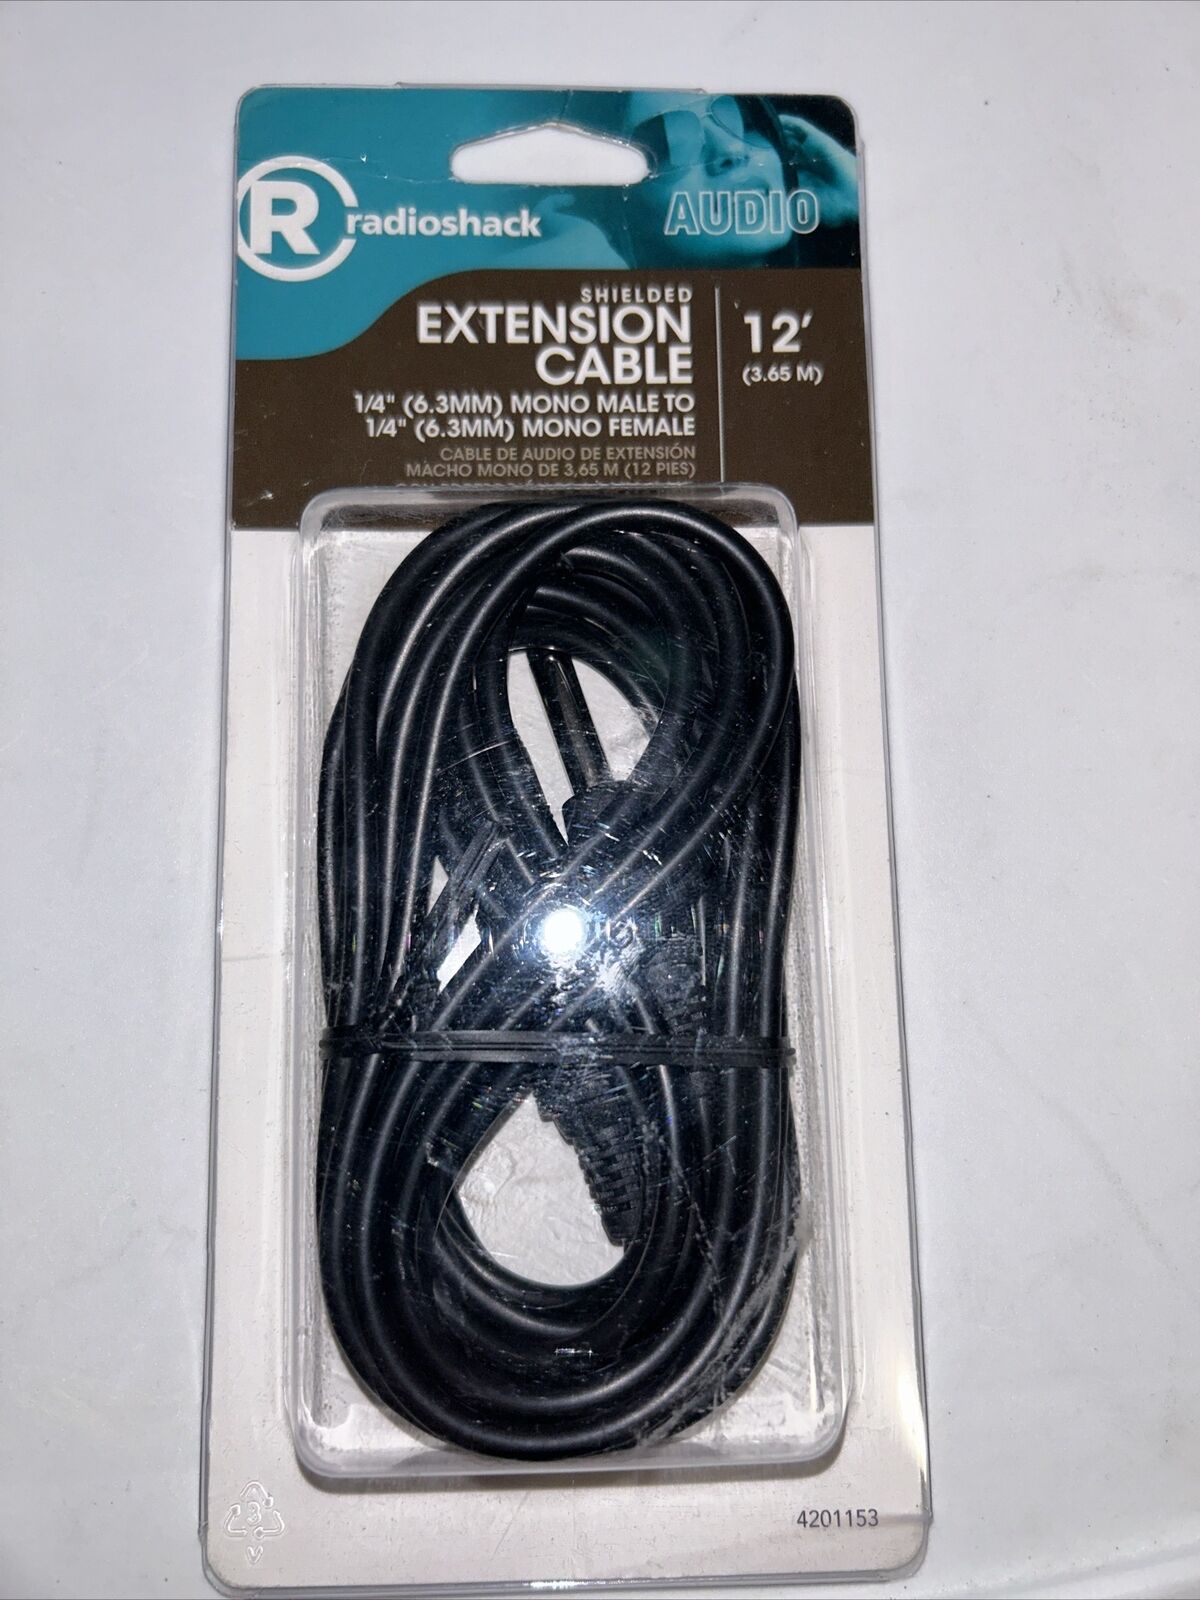 Radio Shack Shielded Extension Cable 1/4